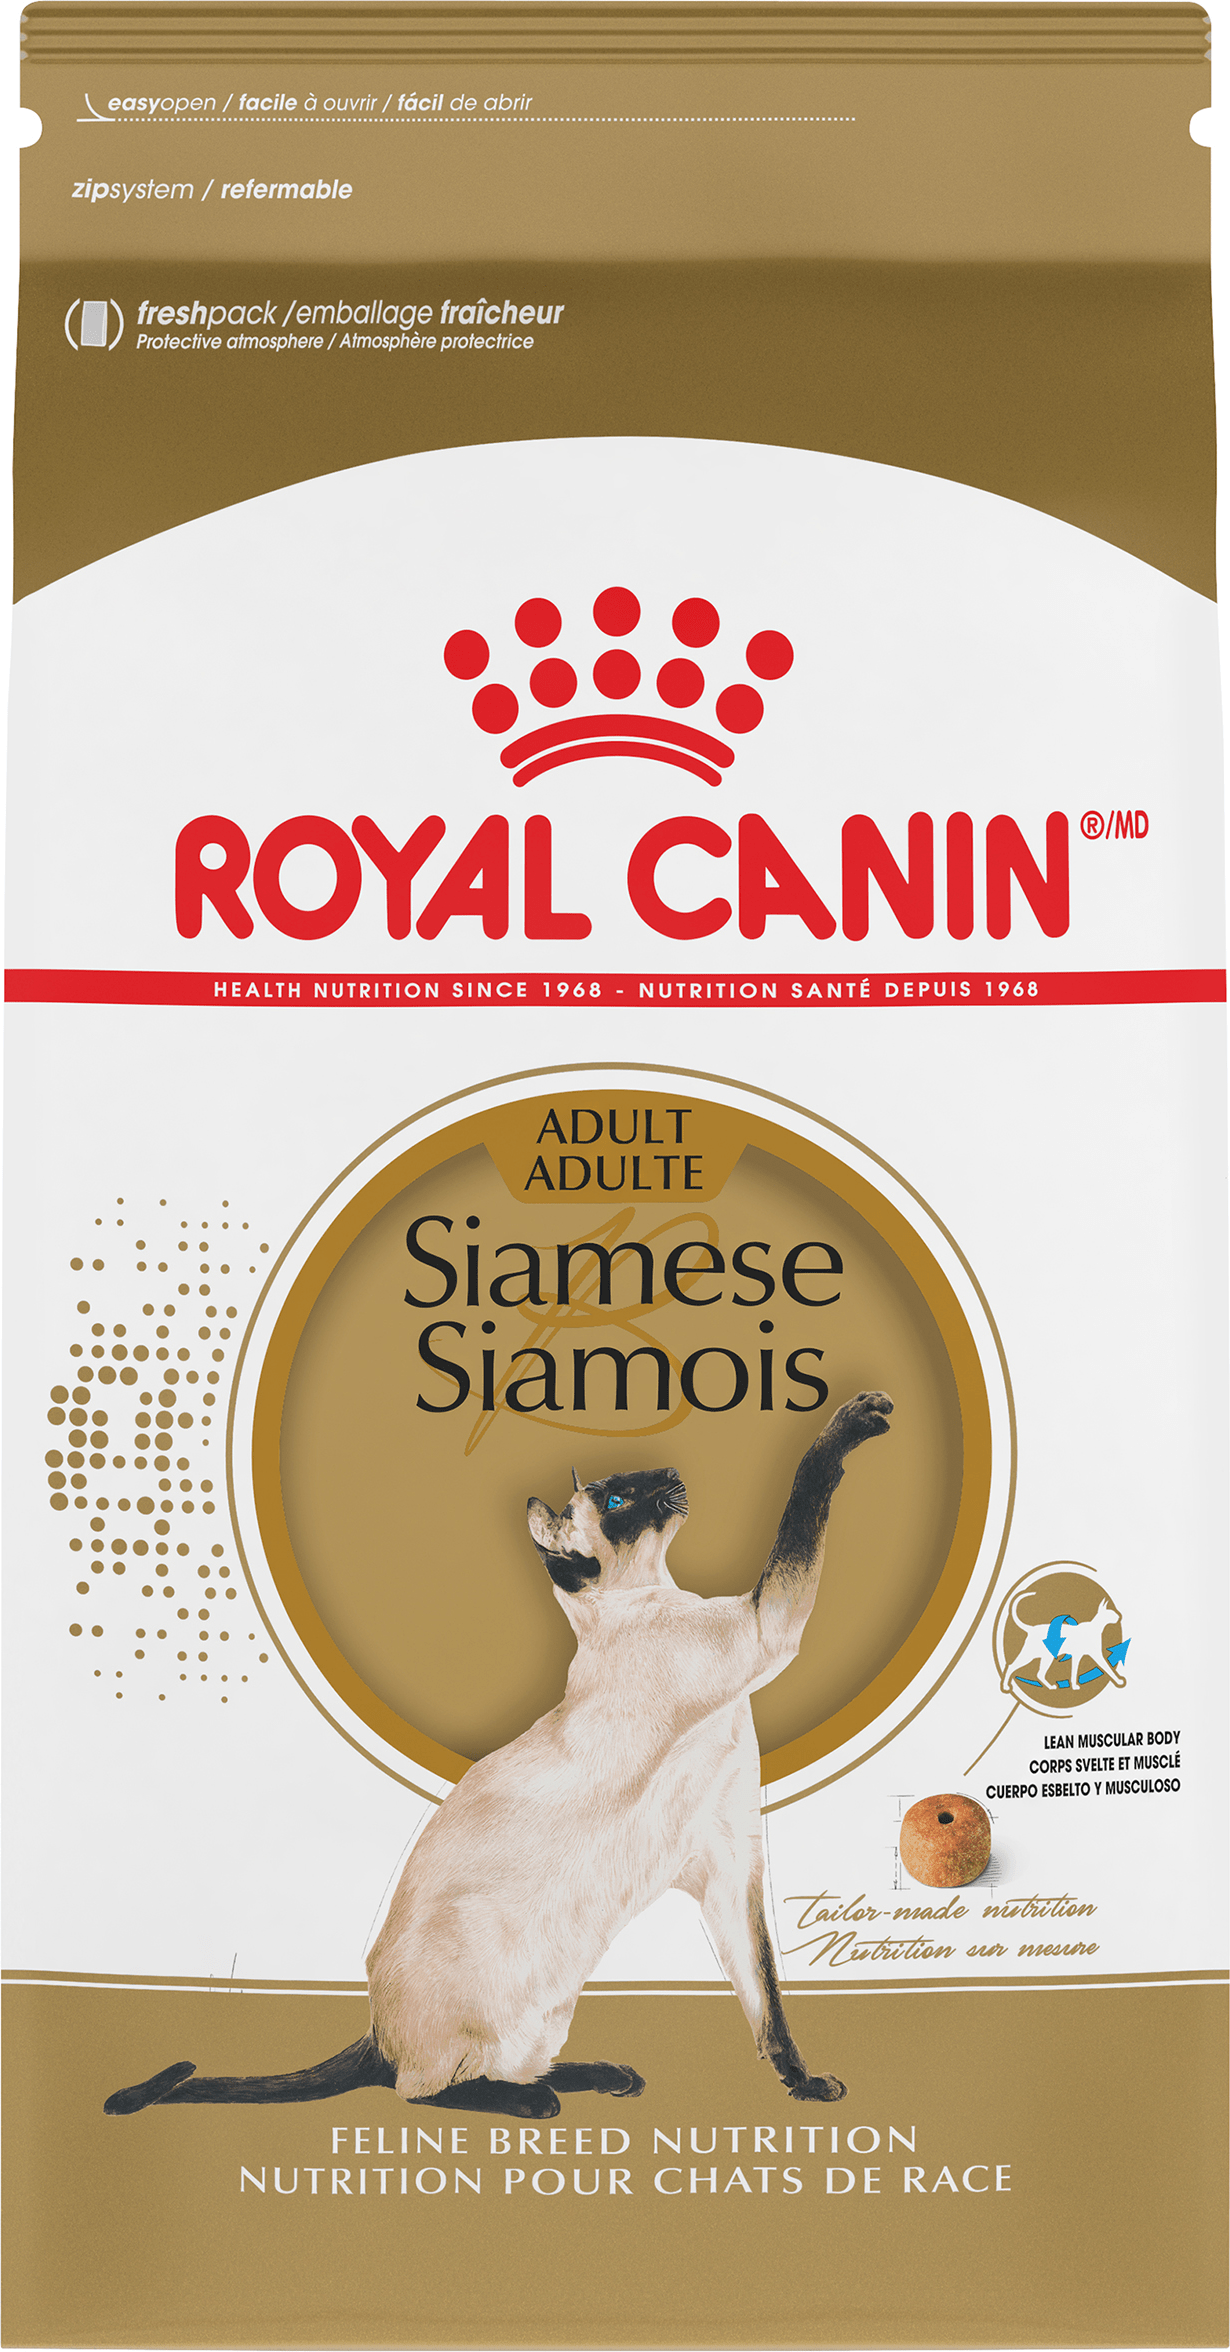 Royal Canin Siamese Adult